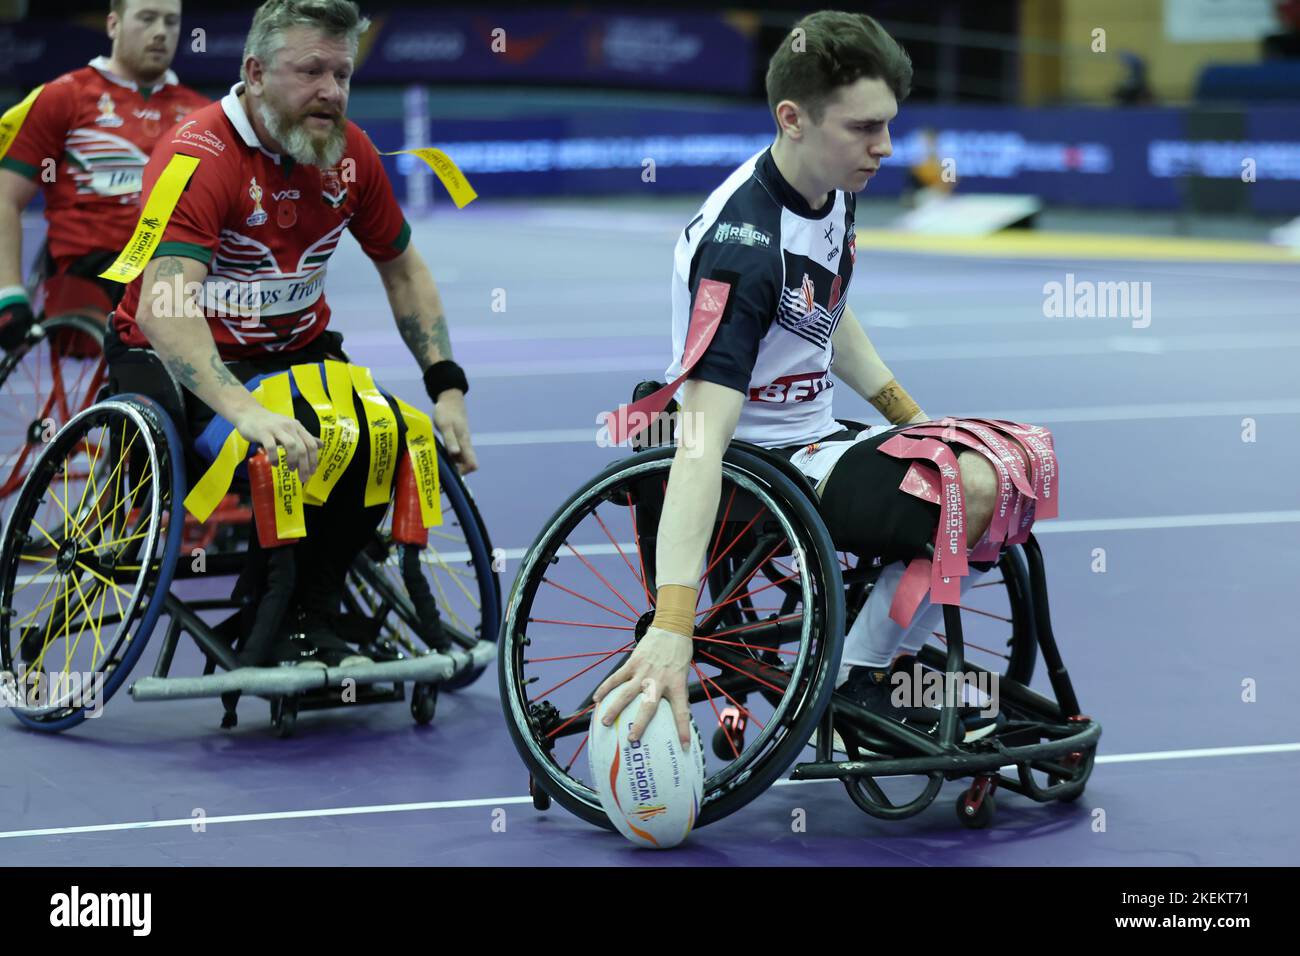 Sheffield, UK. 13th Nov, 2022. English Institute of Sport Sheffield, Sheffield, South Yorkshire, 13th November 2022. England Wheelchair Rugby League vs Wales Wheelchair Rugby League in the Rugby League World Cup 2021 Semi-Final Robert Hawkins of England Wheelchair Rugby League scores the try Credit: Touchlinepics/Alamy Live News Stock Photo